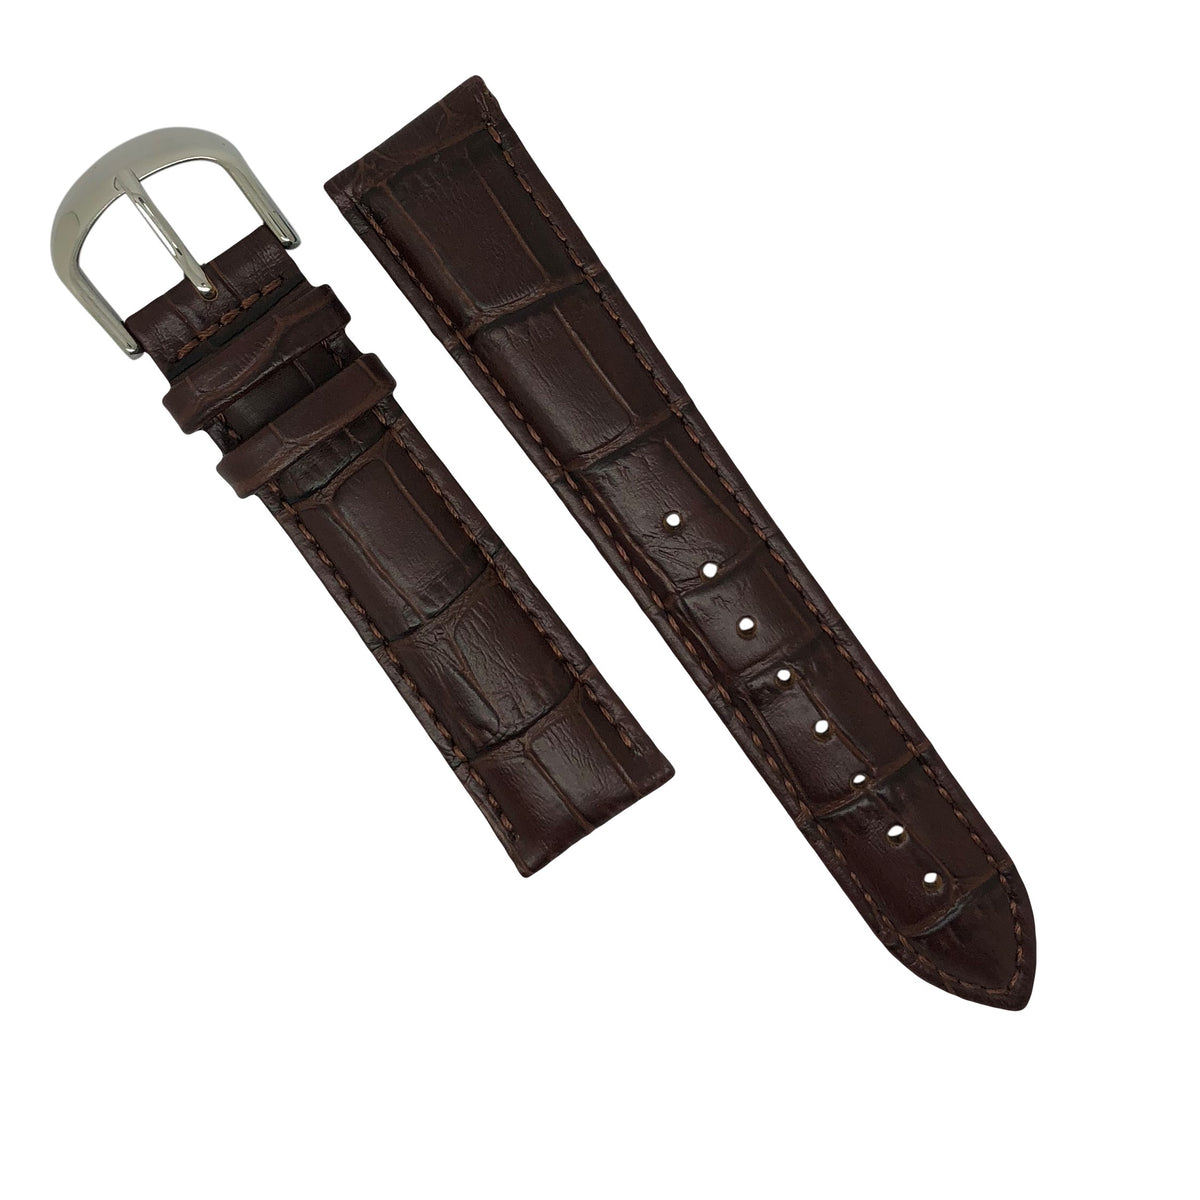 Genuine Croc Pattern Stitched Leather Watch Strap in Brown with Silver Buckle (12mm) - Nomad Watch Works Malaysia